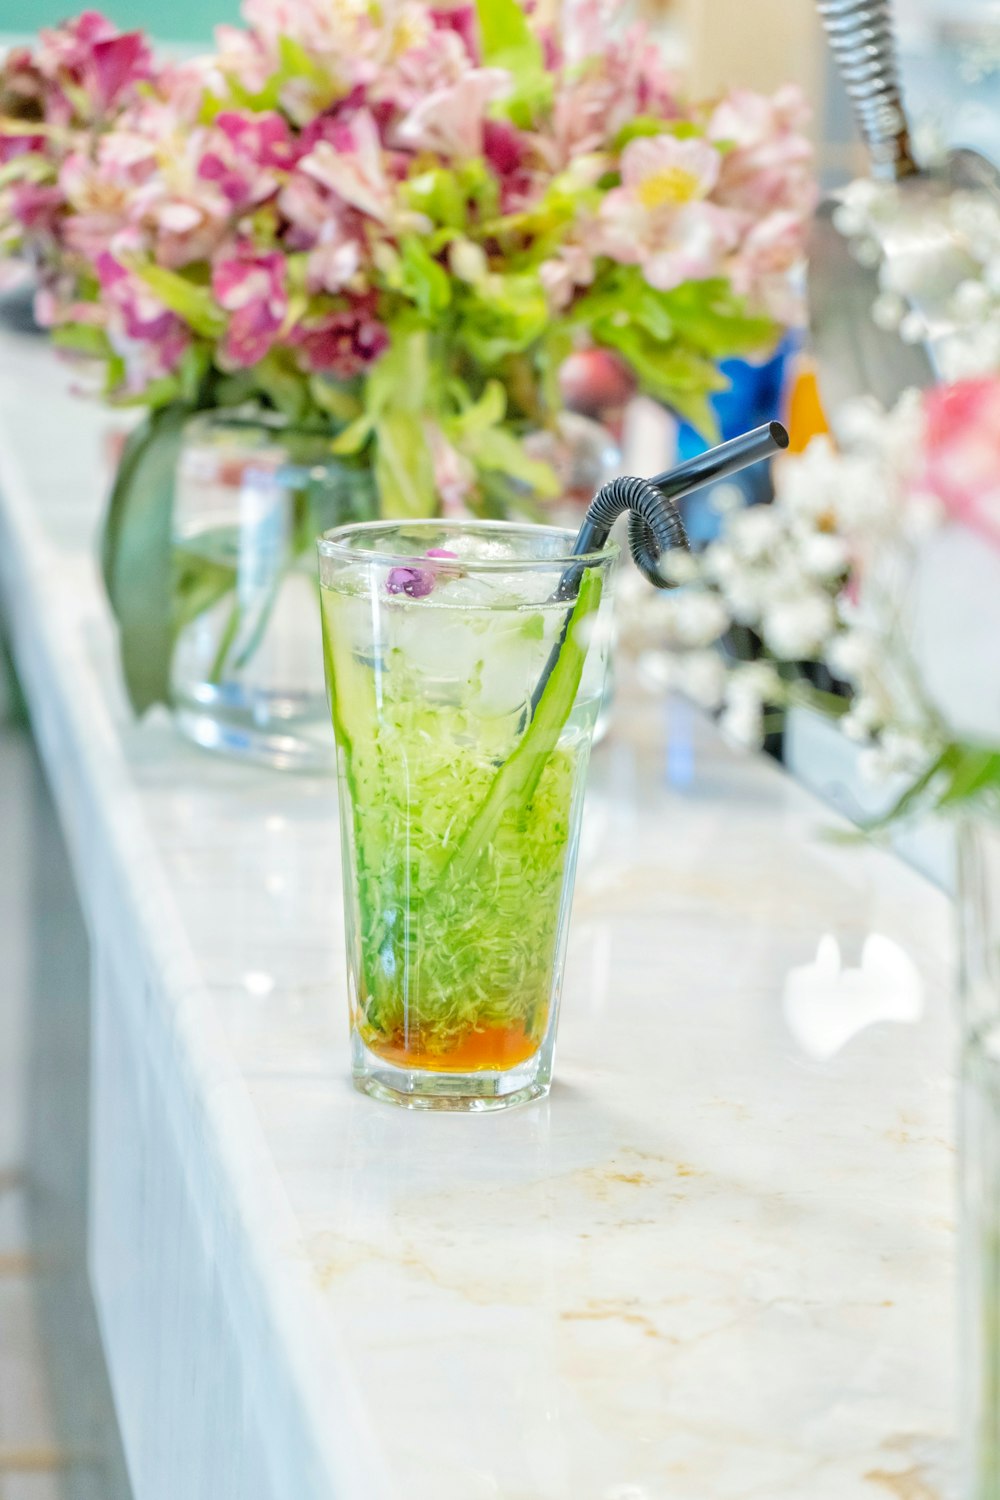 a glass filled with green liquid next to a vase of flowers